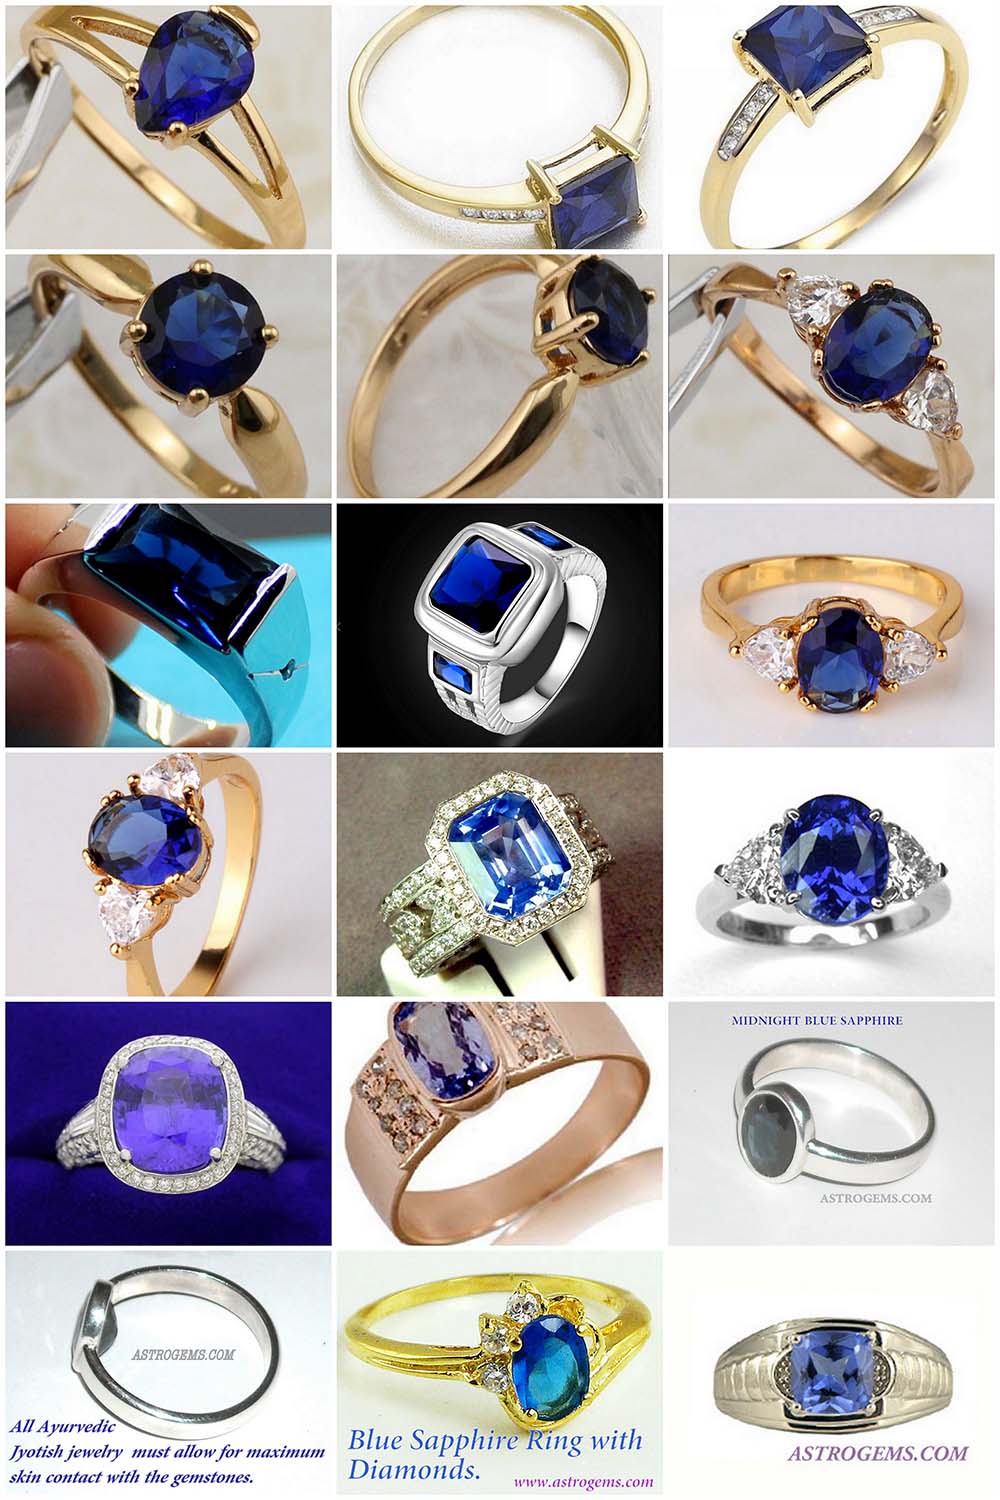 Astrogems makes healing gem rings with blue sapphire or other types of gemstones.